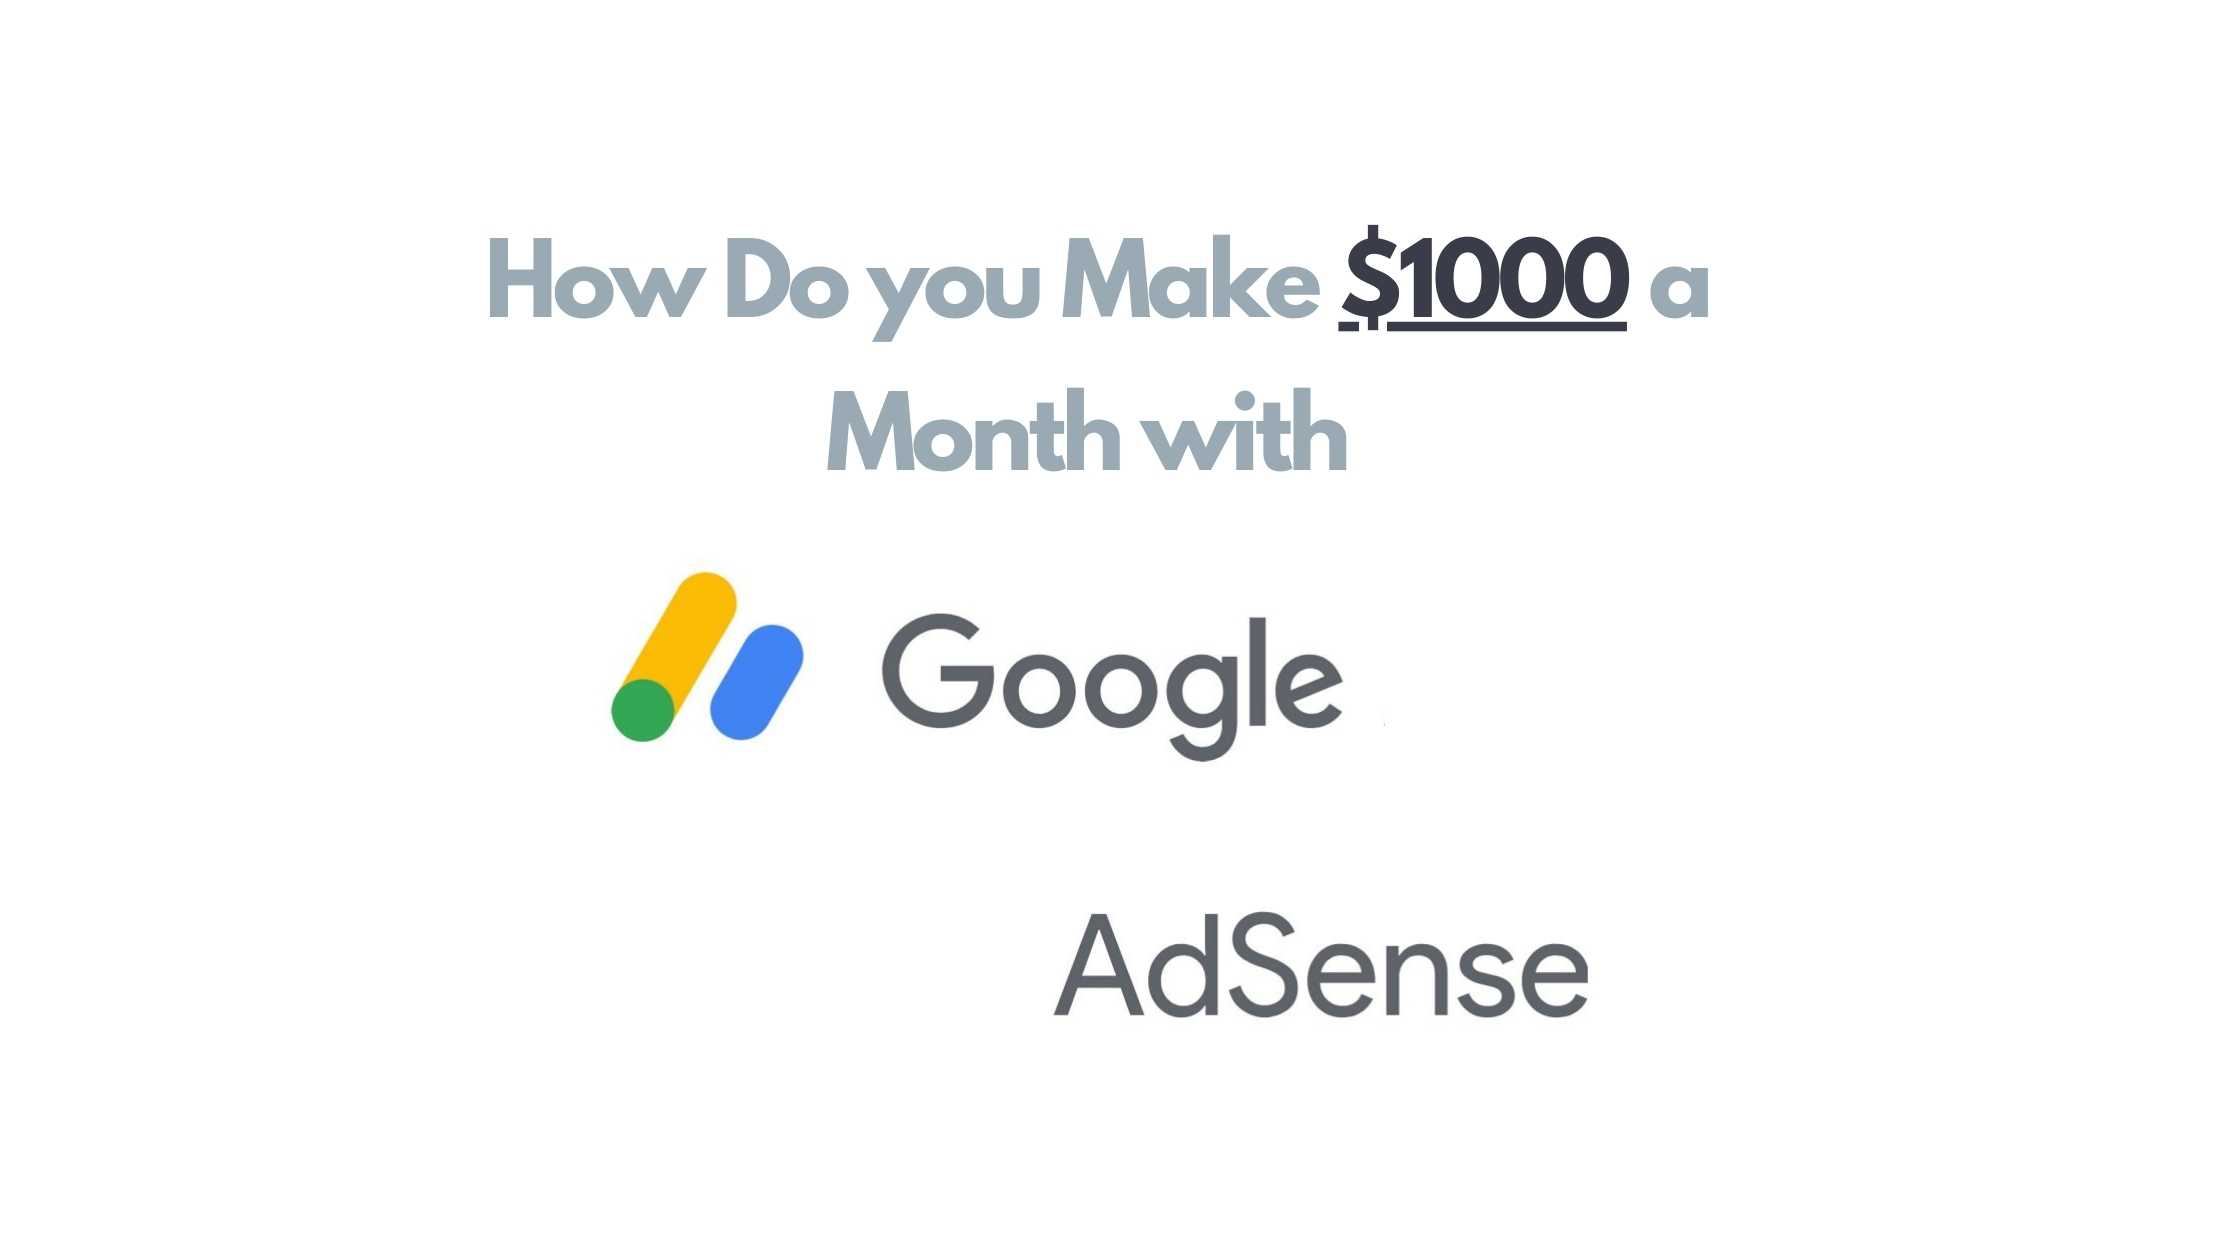 How Do You Make $1000 a Month With AdSense?